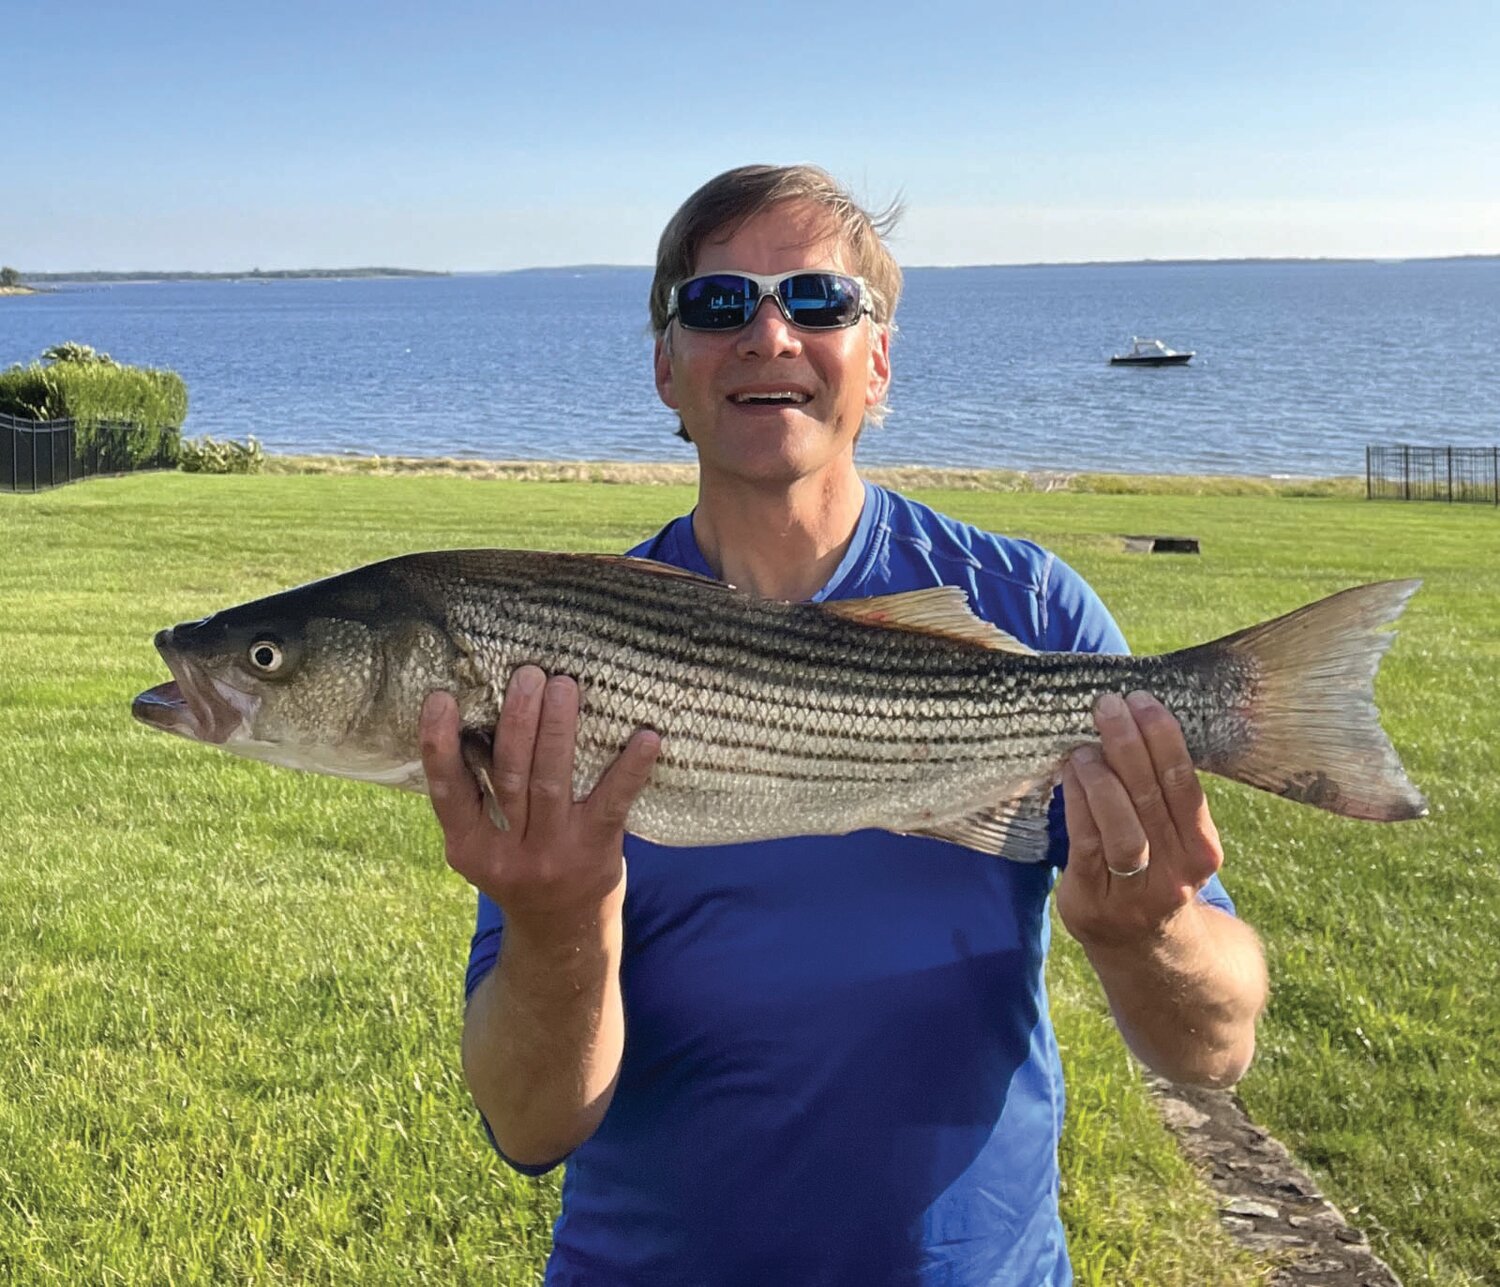 BIG CATCH: Brian Abbott of Barrington, said, “Caught this striper (29 inches, 8 pounds) in 15 feet of water about 100 yards off Barrington Beach with a Yo-Zuri Crystal Minnow.” (Submitted photo)